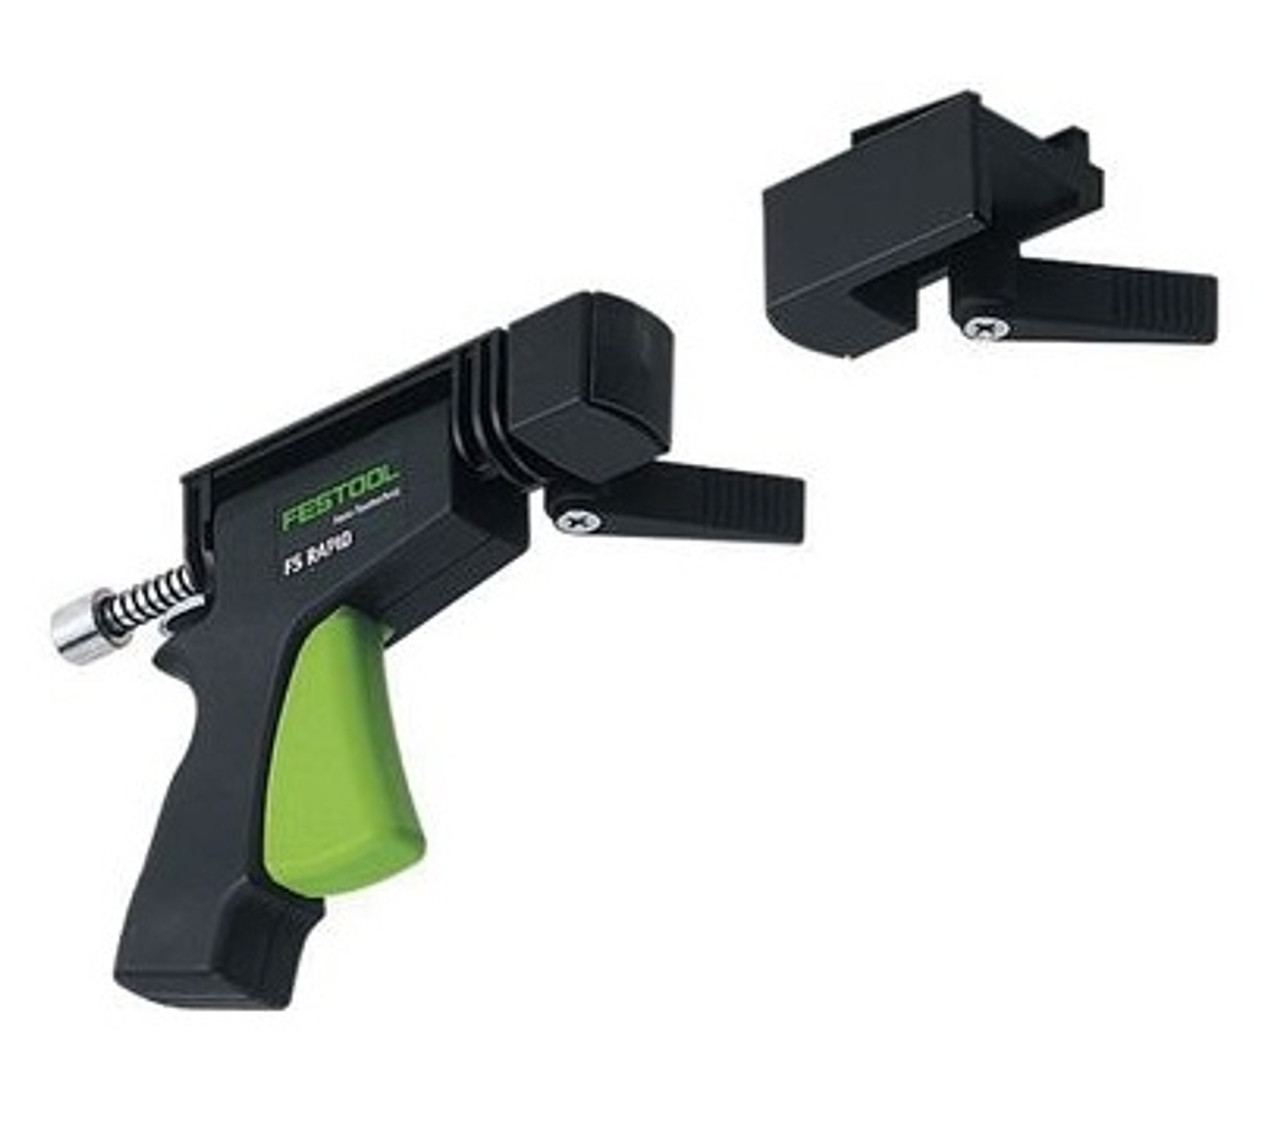 Festool Fs-Rapid Clamp And Fixed Jaws